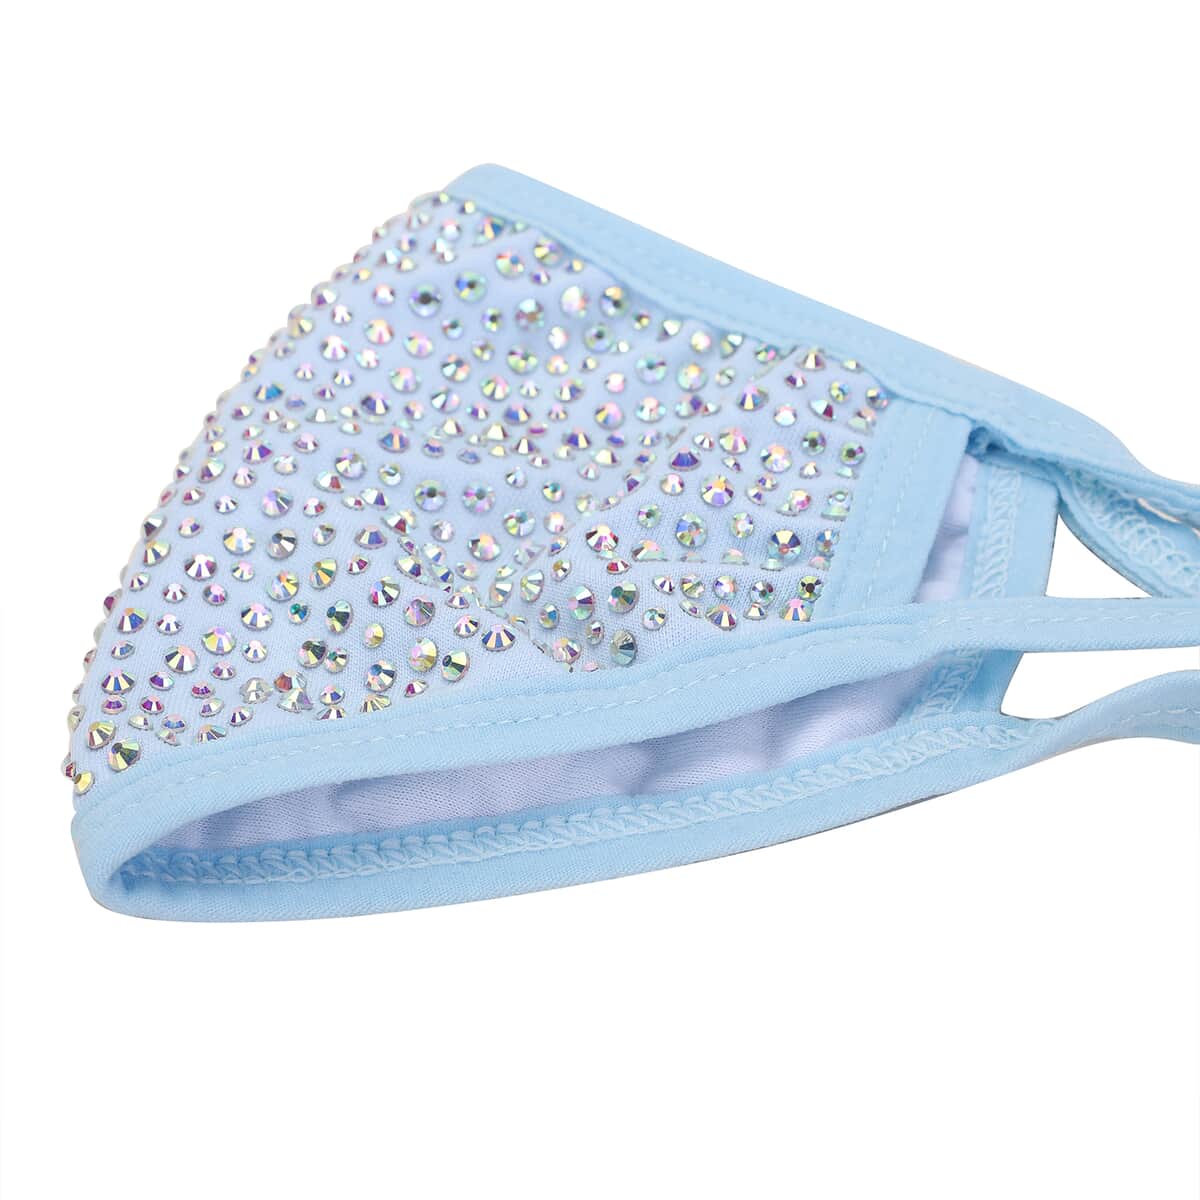 Sky Blue with Sparkling Crystal Rhinestone 2 Ply Fashion Mask (Non-Returnable) image number 3